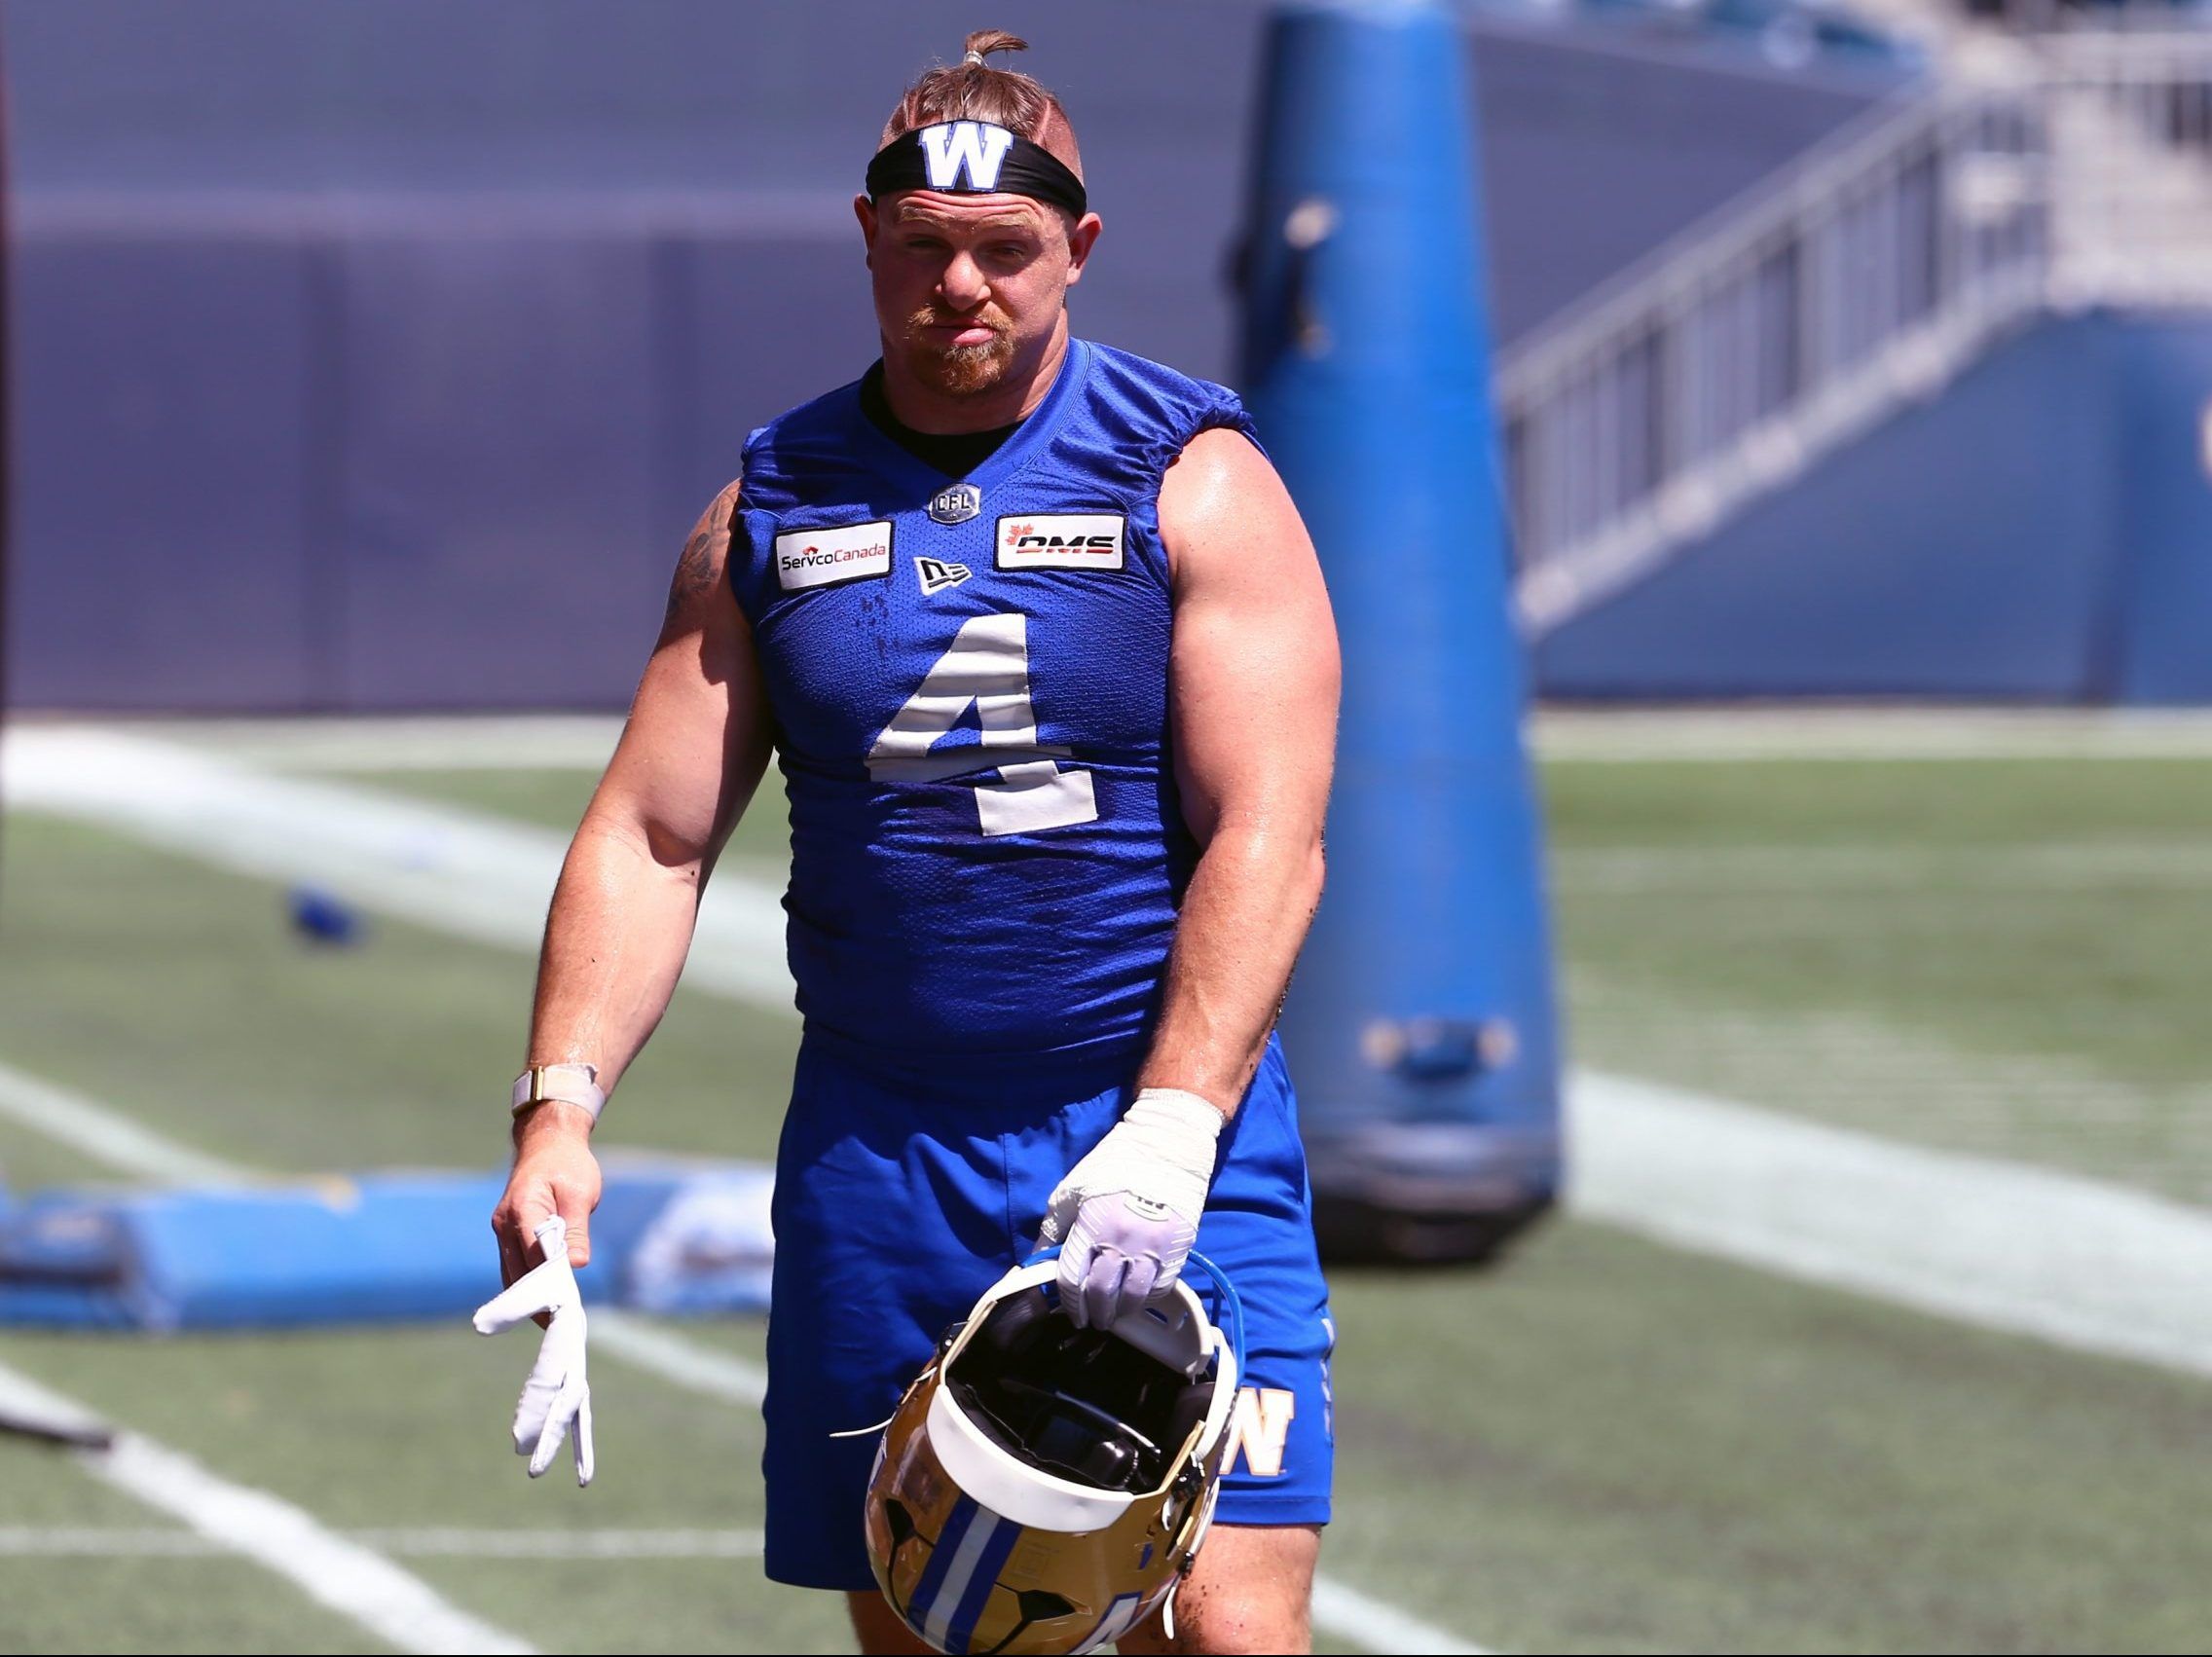 No pity party: Bombers hope to squeeze life from reeling Redblacks ...